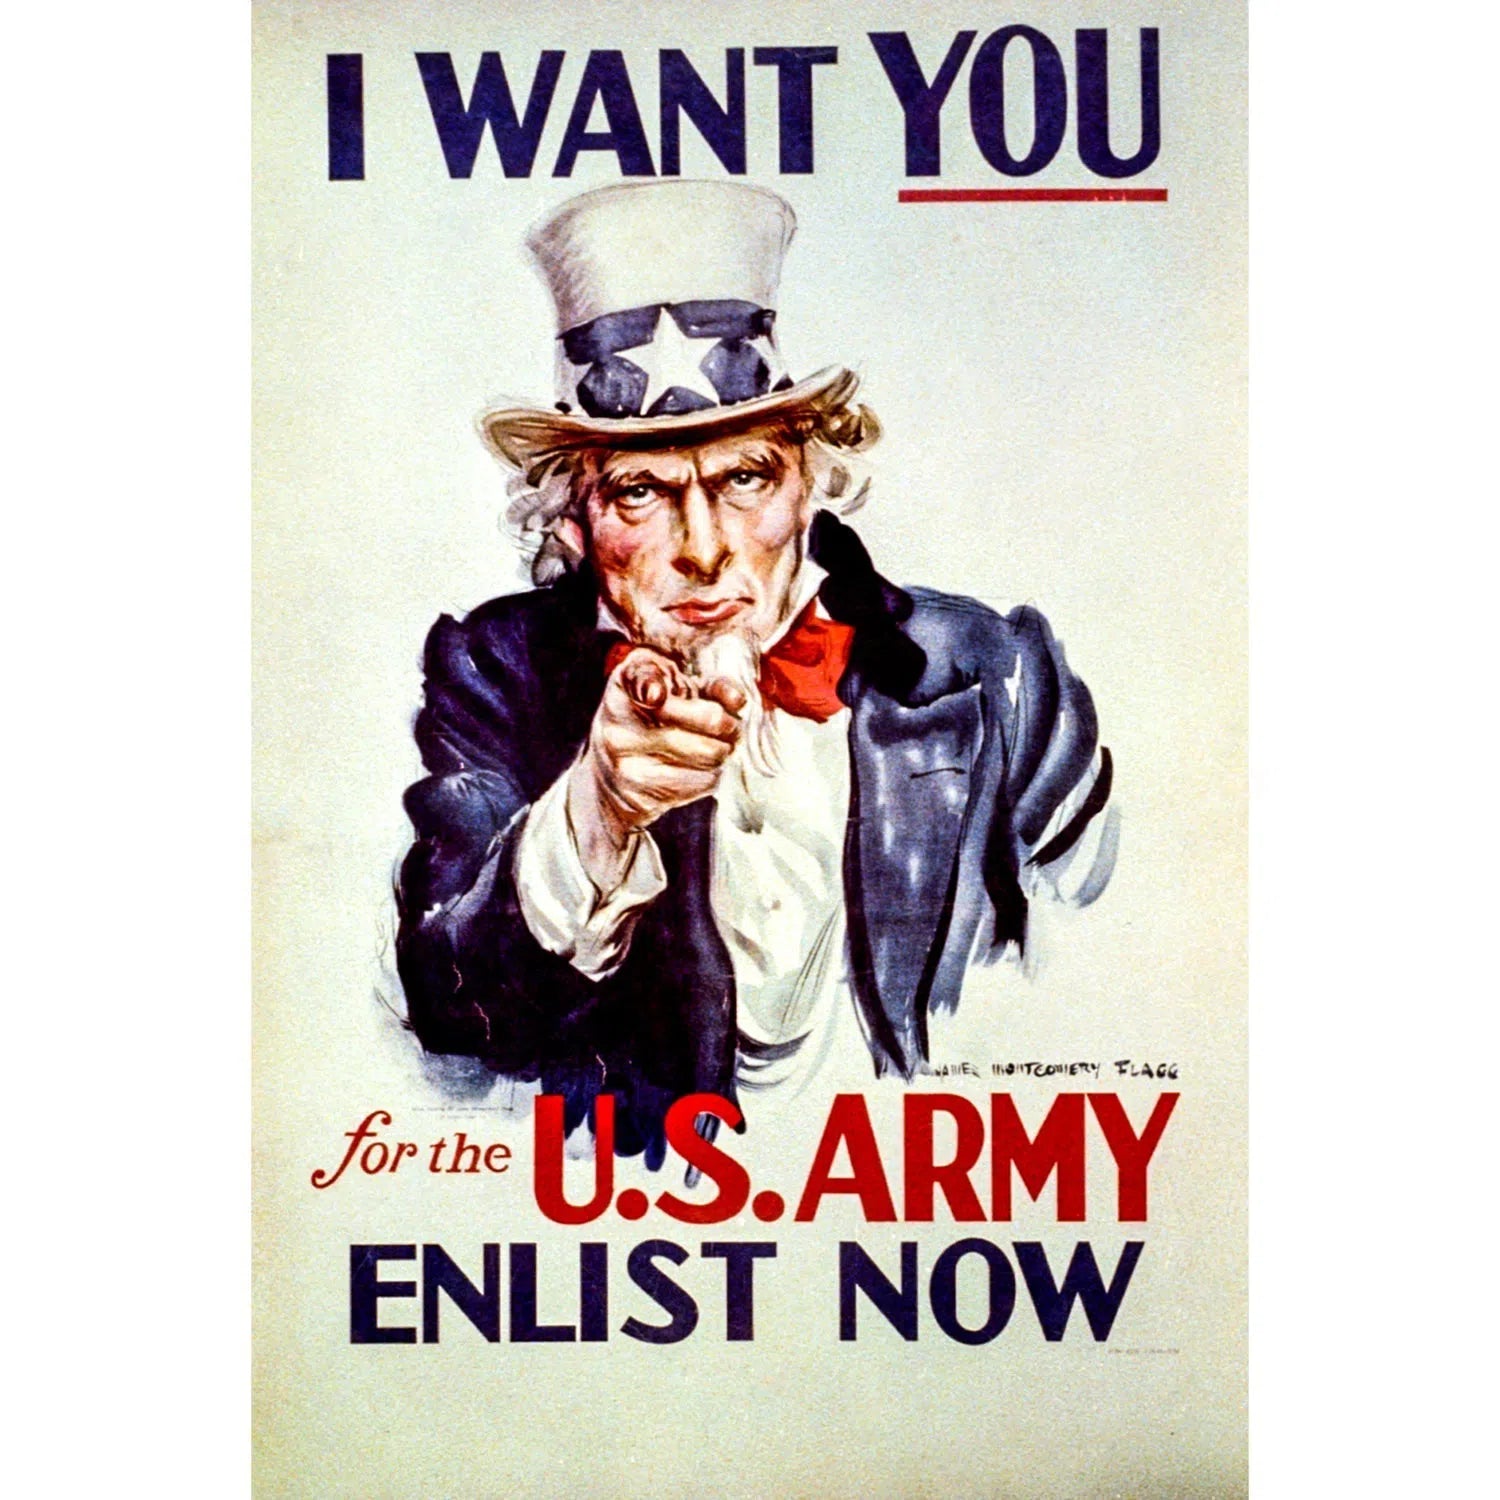 I want you - Us Army enlist now-Imagesdartistes